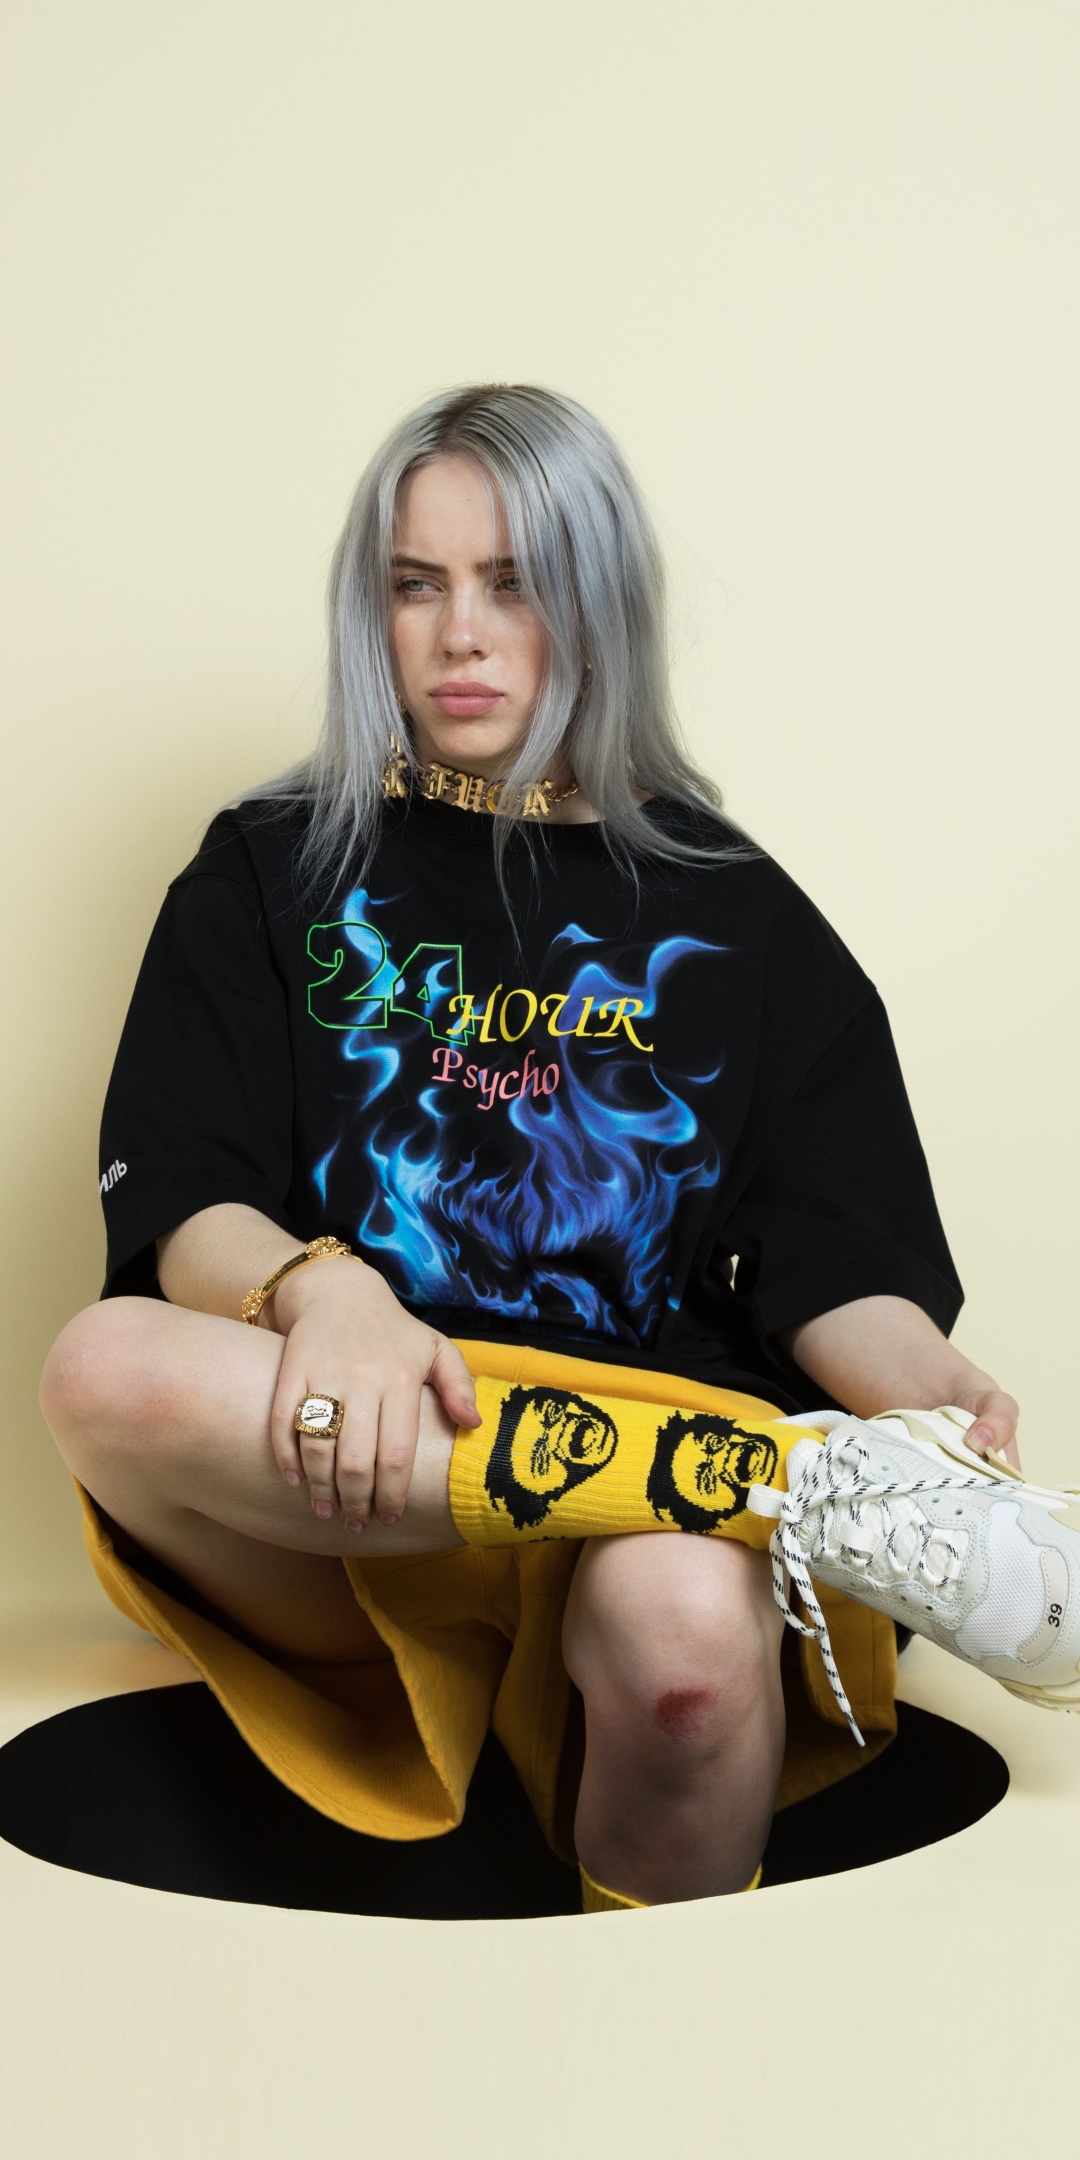 MusicBillie Eilish 1080x2160 Wallpaper ID 782112   Mobile Abyss 1080x2160